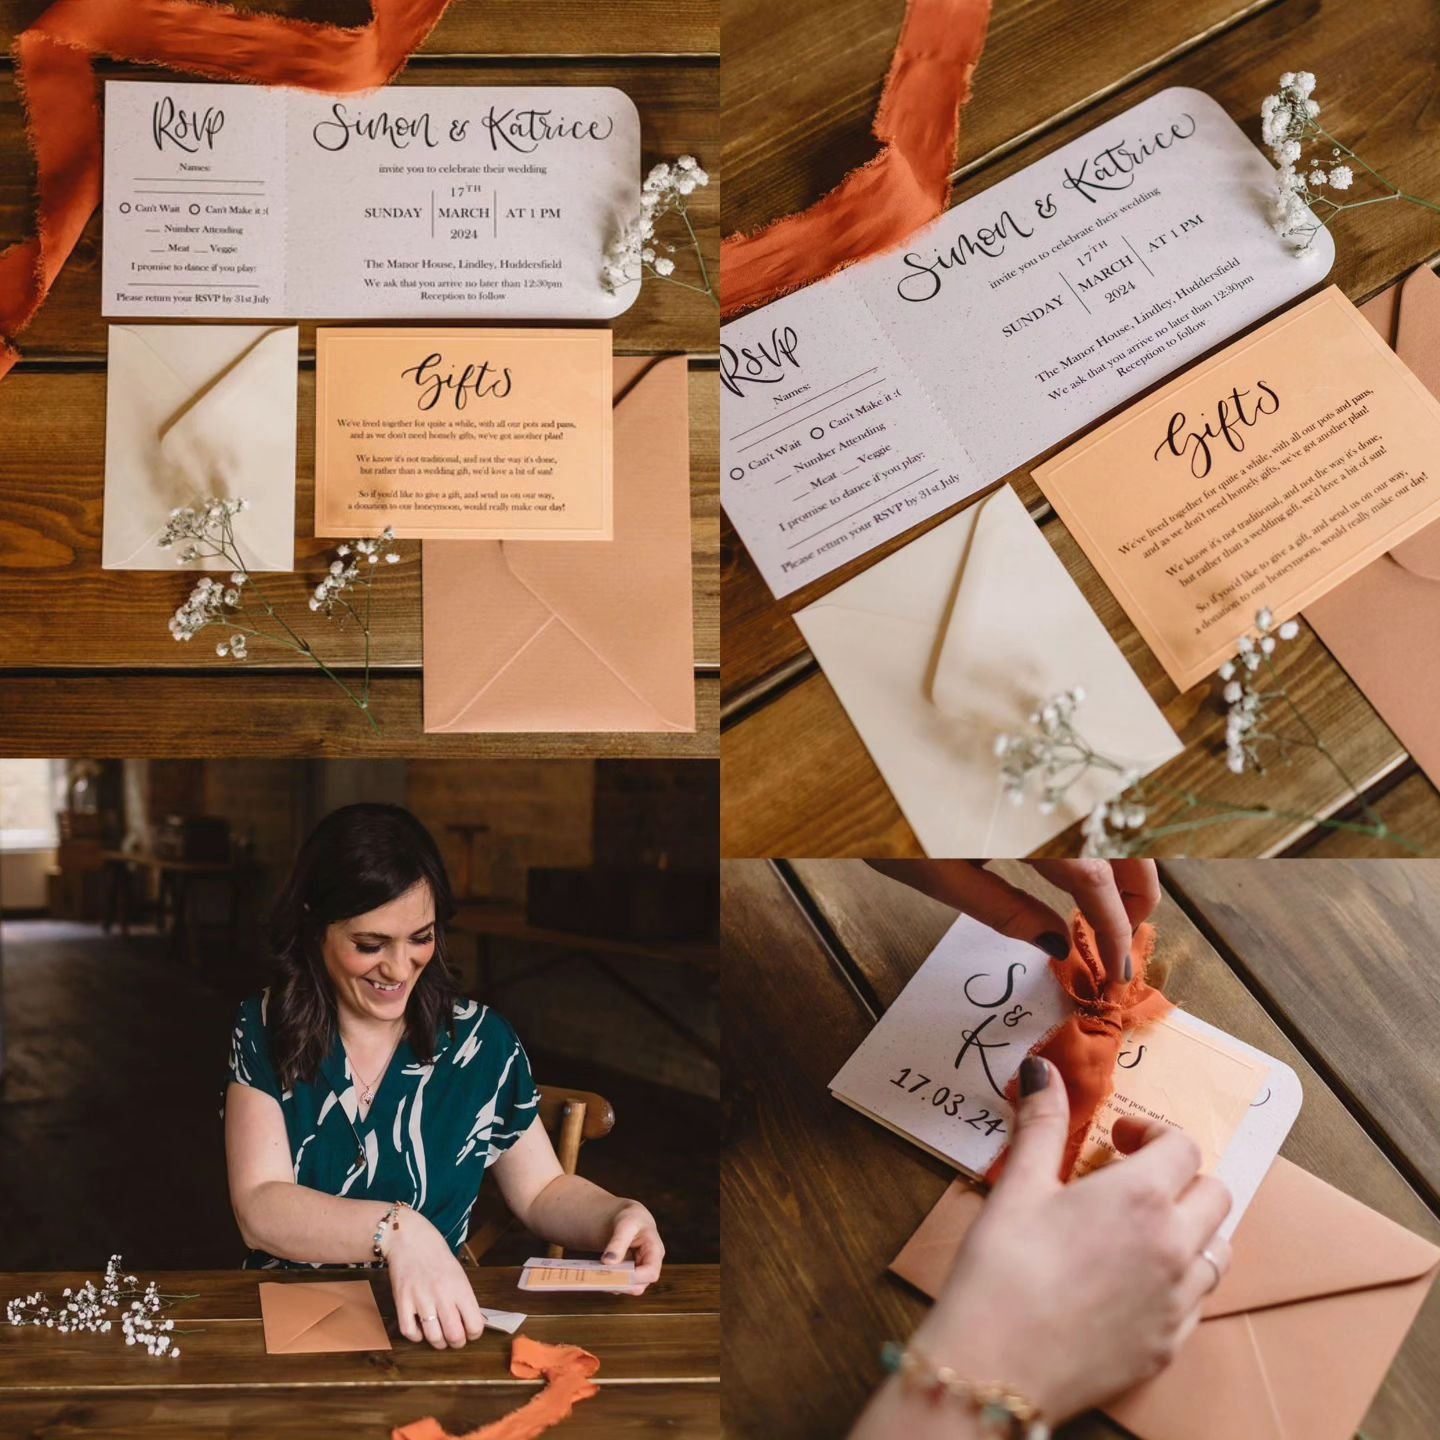 From Invite to On the Day - it was so lovely to work with Simon &amp; Katrice to create their wedding invitations and then use this vision to develop their wedding day signage &amp; stationery! 

What a transformation from paper to reality 😍

📷 Inv